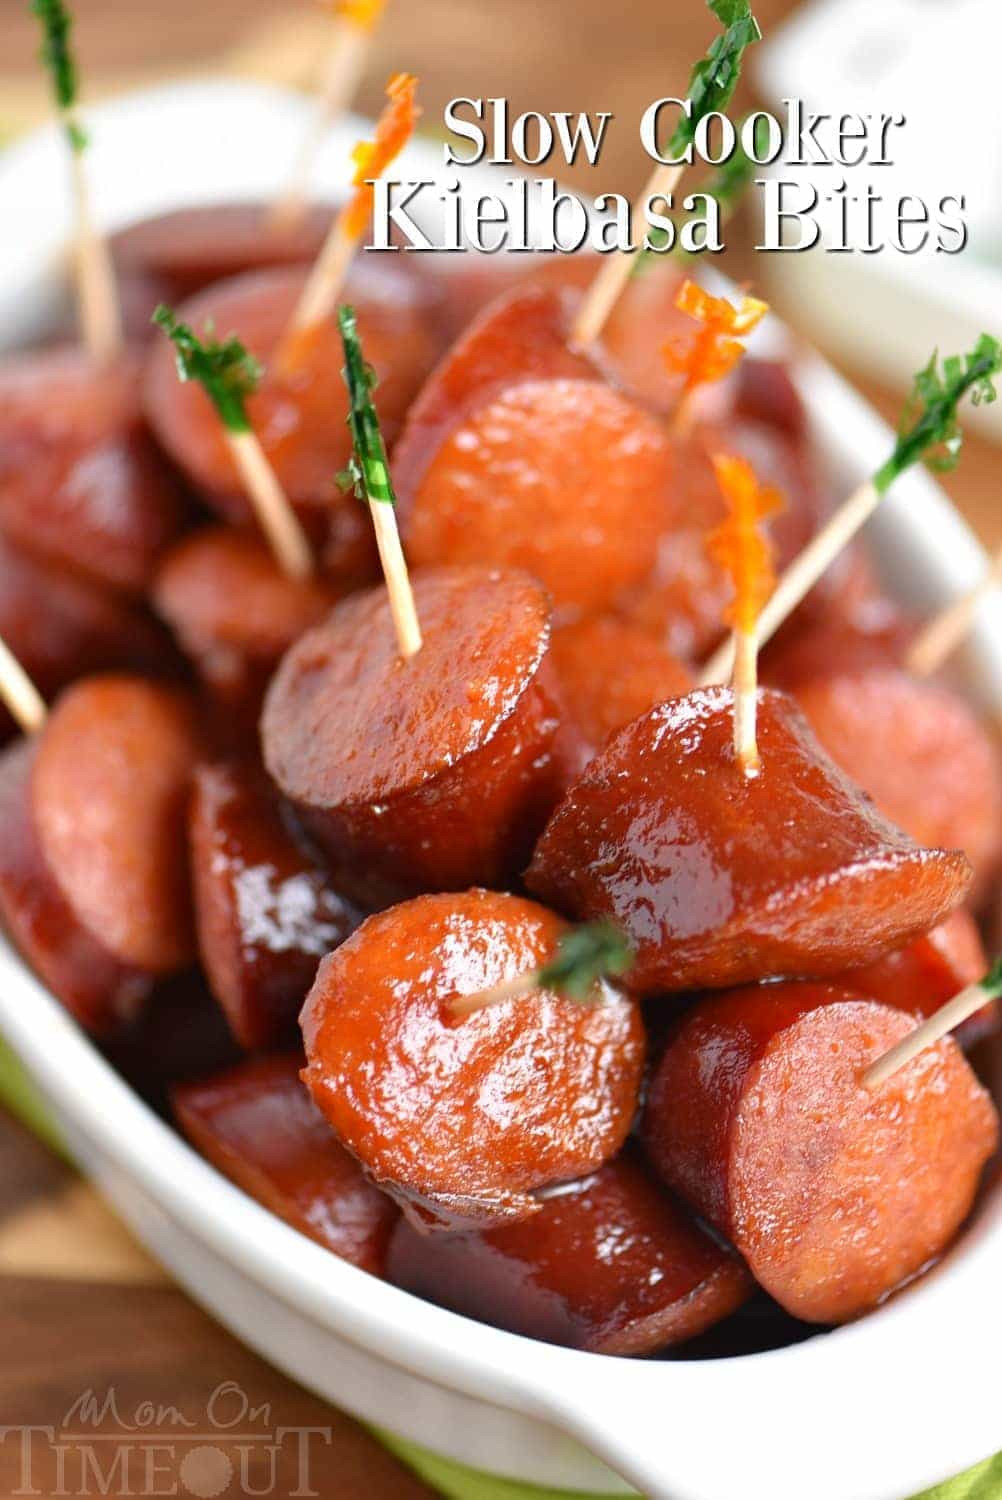 Slow Cooker Appetizers For Party
 Slow Cooker Kielbasa Bites Mom Timeout